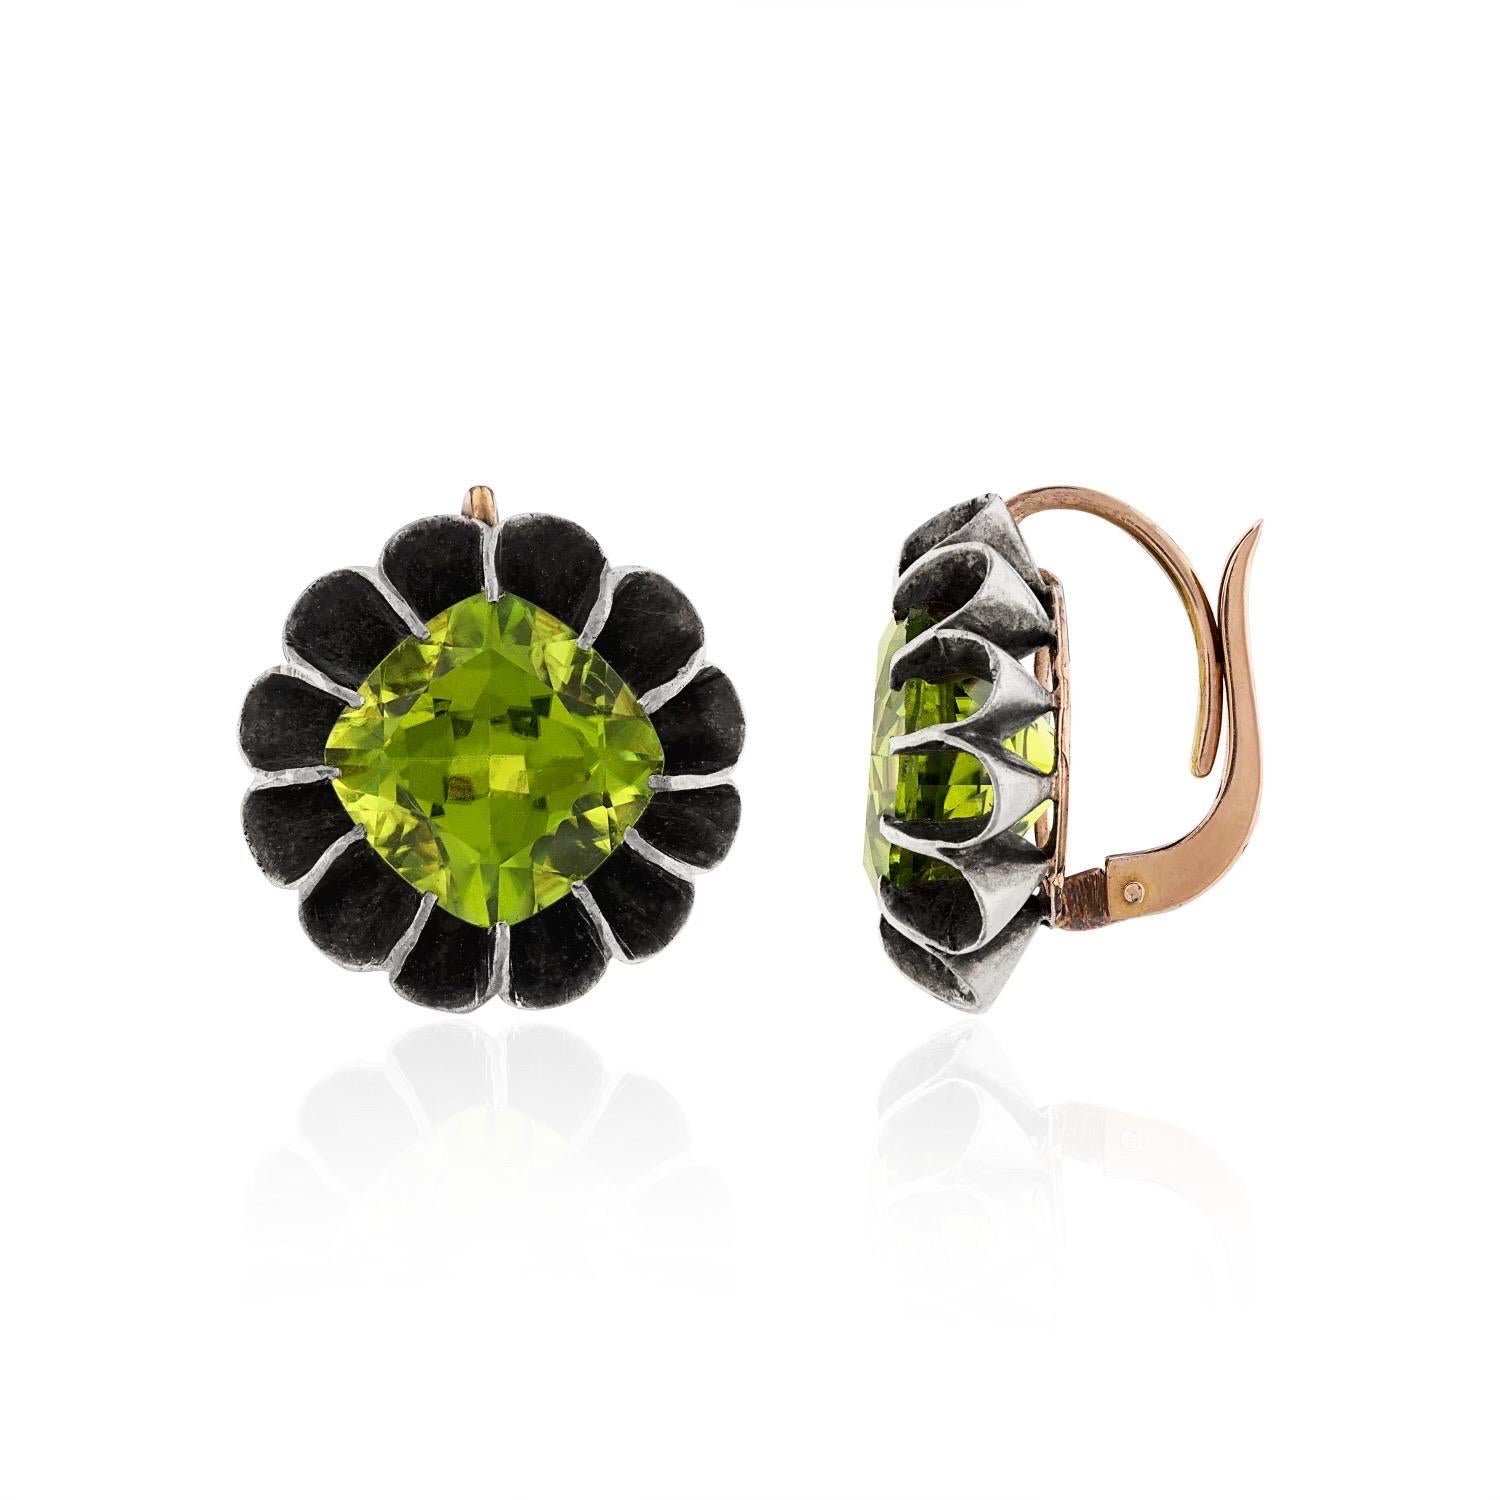 Mindi Mond's Reconceived One-of-a-Kind Cushion Cut Peridot Drop Earrings will transport you back in time to the captivating Victorian era. These vibrant earrings are a timeless ode to the romantic Victorian era, meticulously crafted to capture the